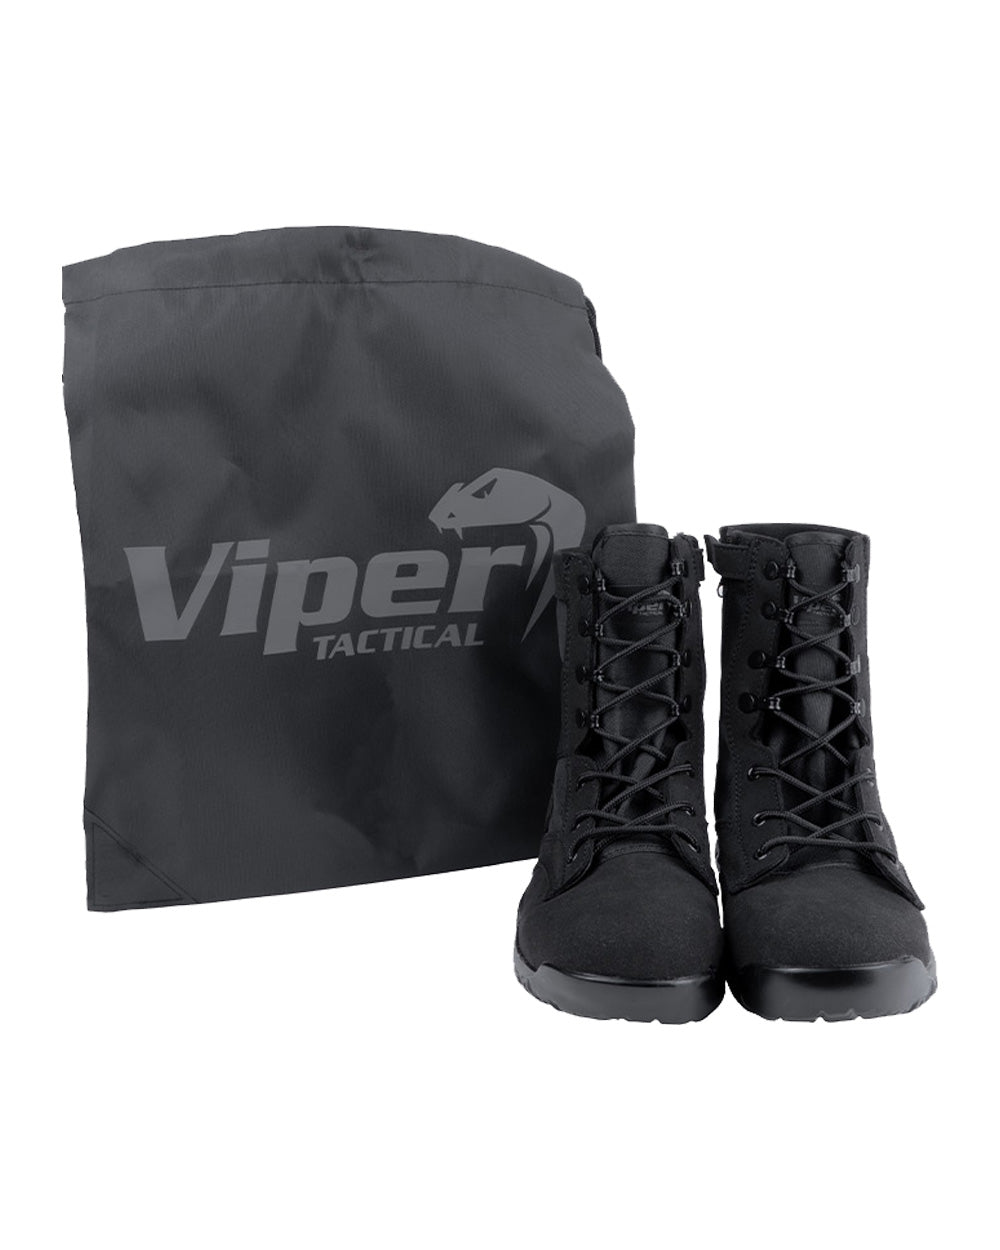 Black coloured Viper Sneaker Boots and Bag on White background 